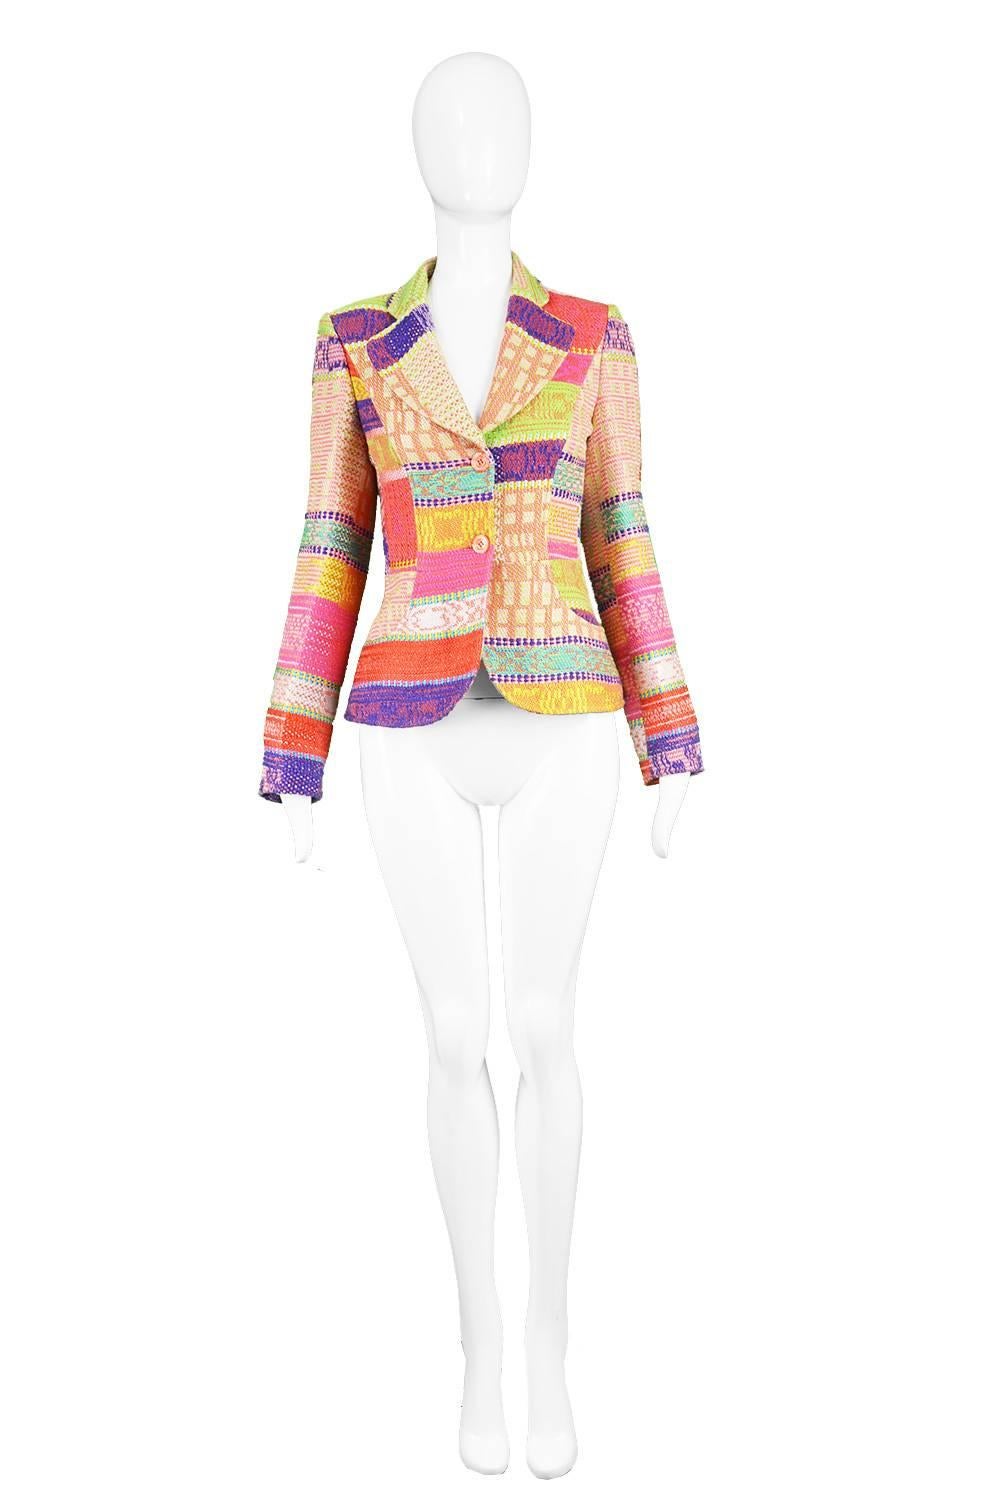 Christian Lacroix Brightly Multicolored Woven Patterned Women's Blazer Jacket

Size: Labelled EU 36 which is roughly a UK 8/ US 4. Please check measurements. 
Bust - 34” / 86cm (allow a couple of inches room for movement)
Waist - 26” / 66cm
Length